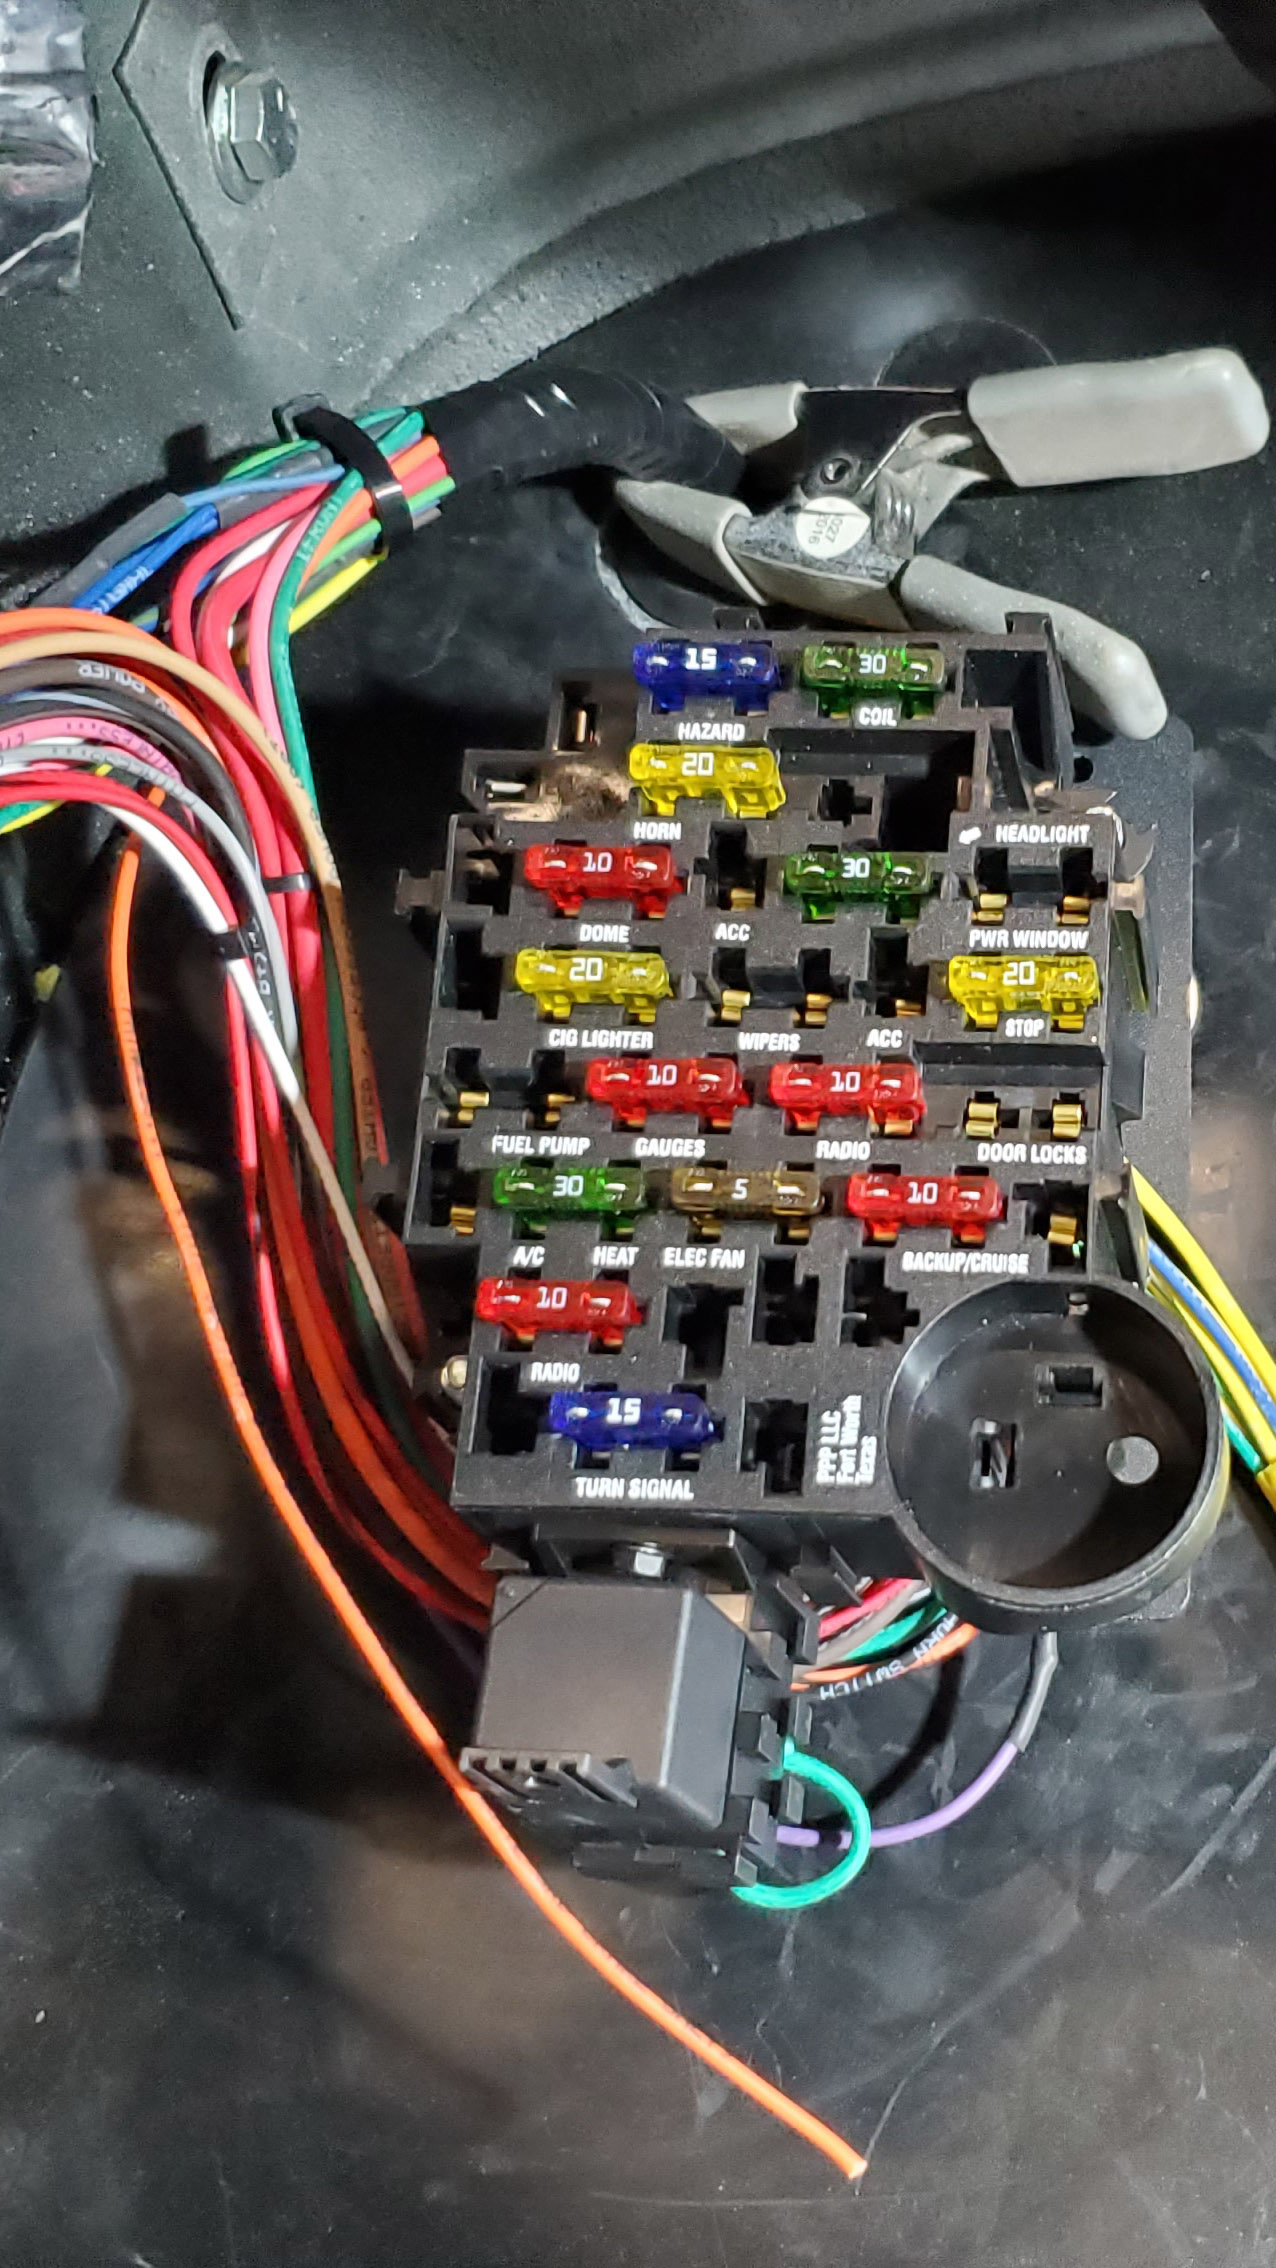 Fuse panel is mounted and a bundle of wires routed to the engine side